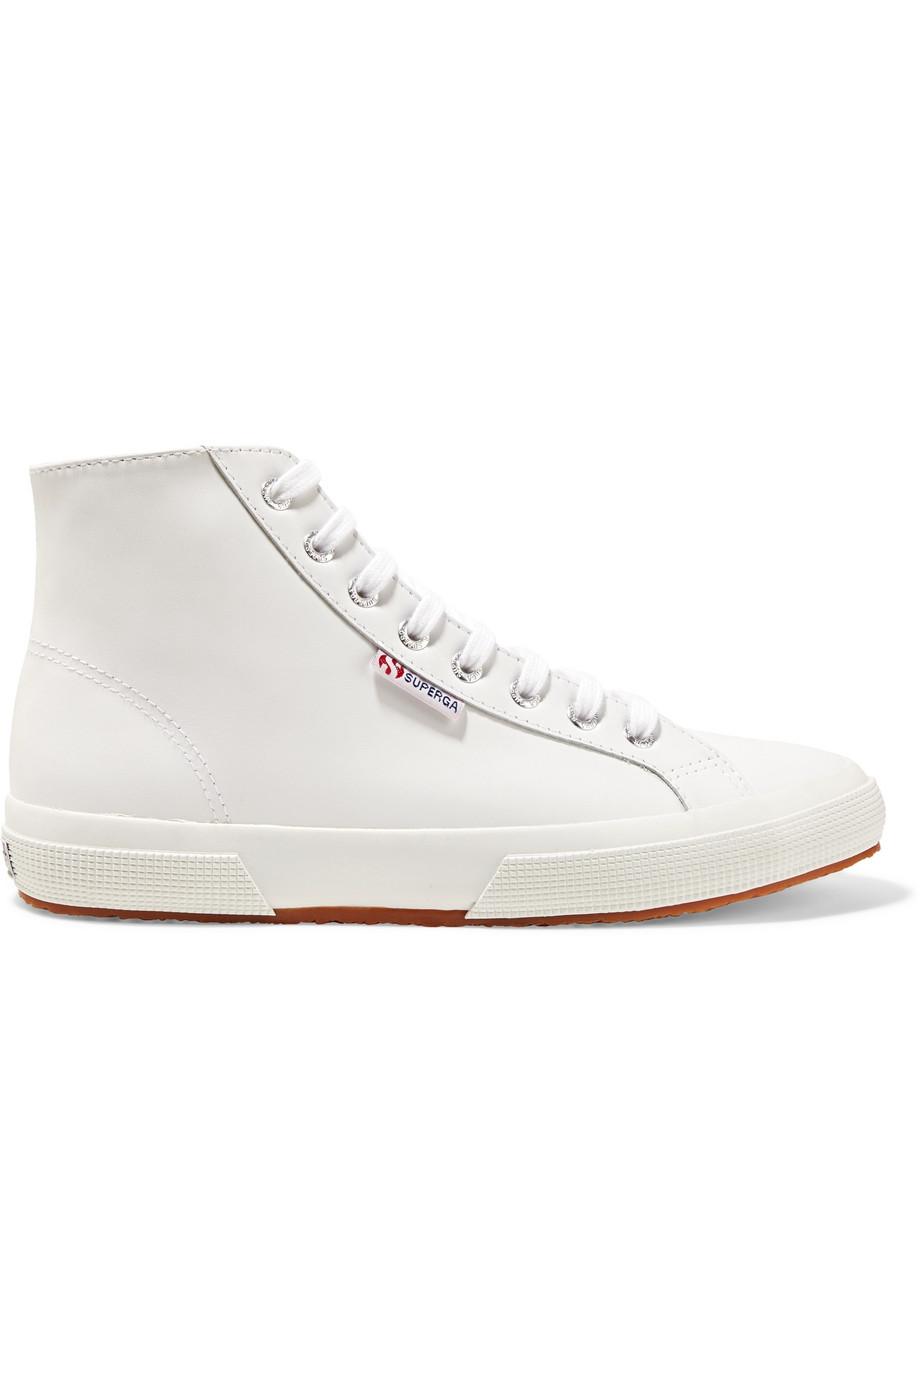 Superga Leather High-top Sneakers 